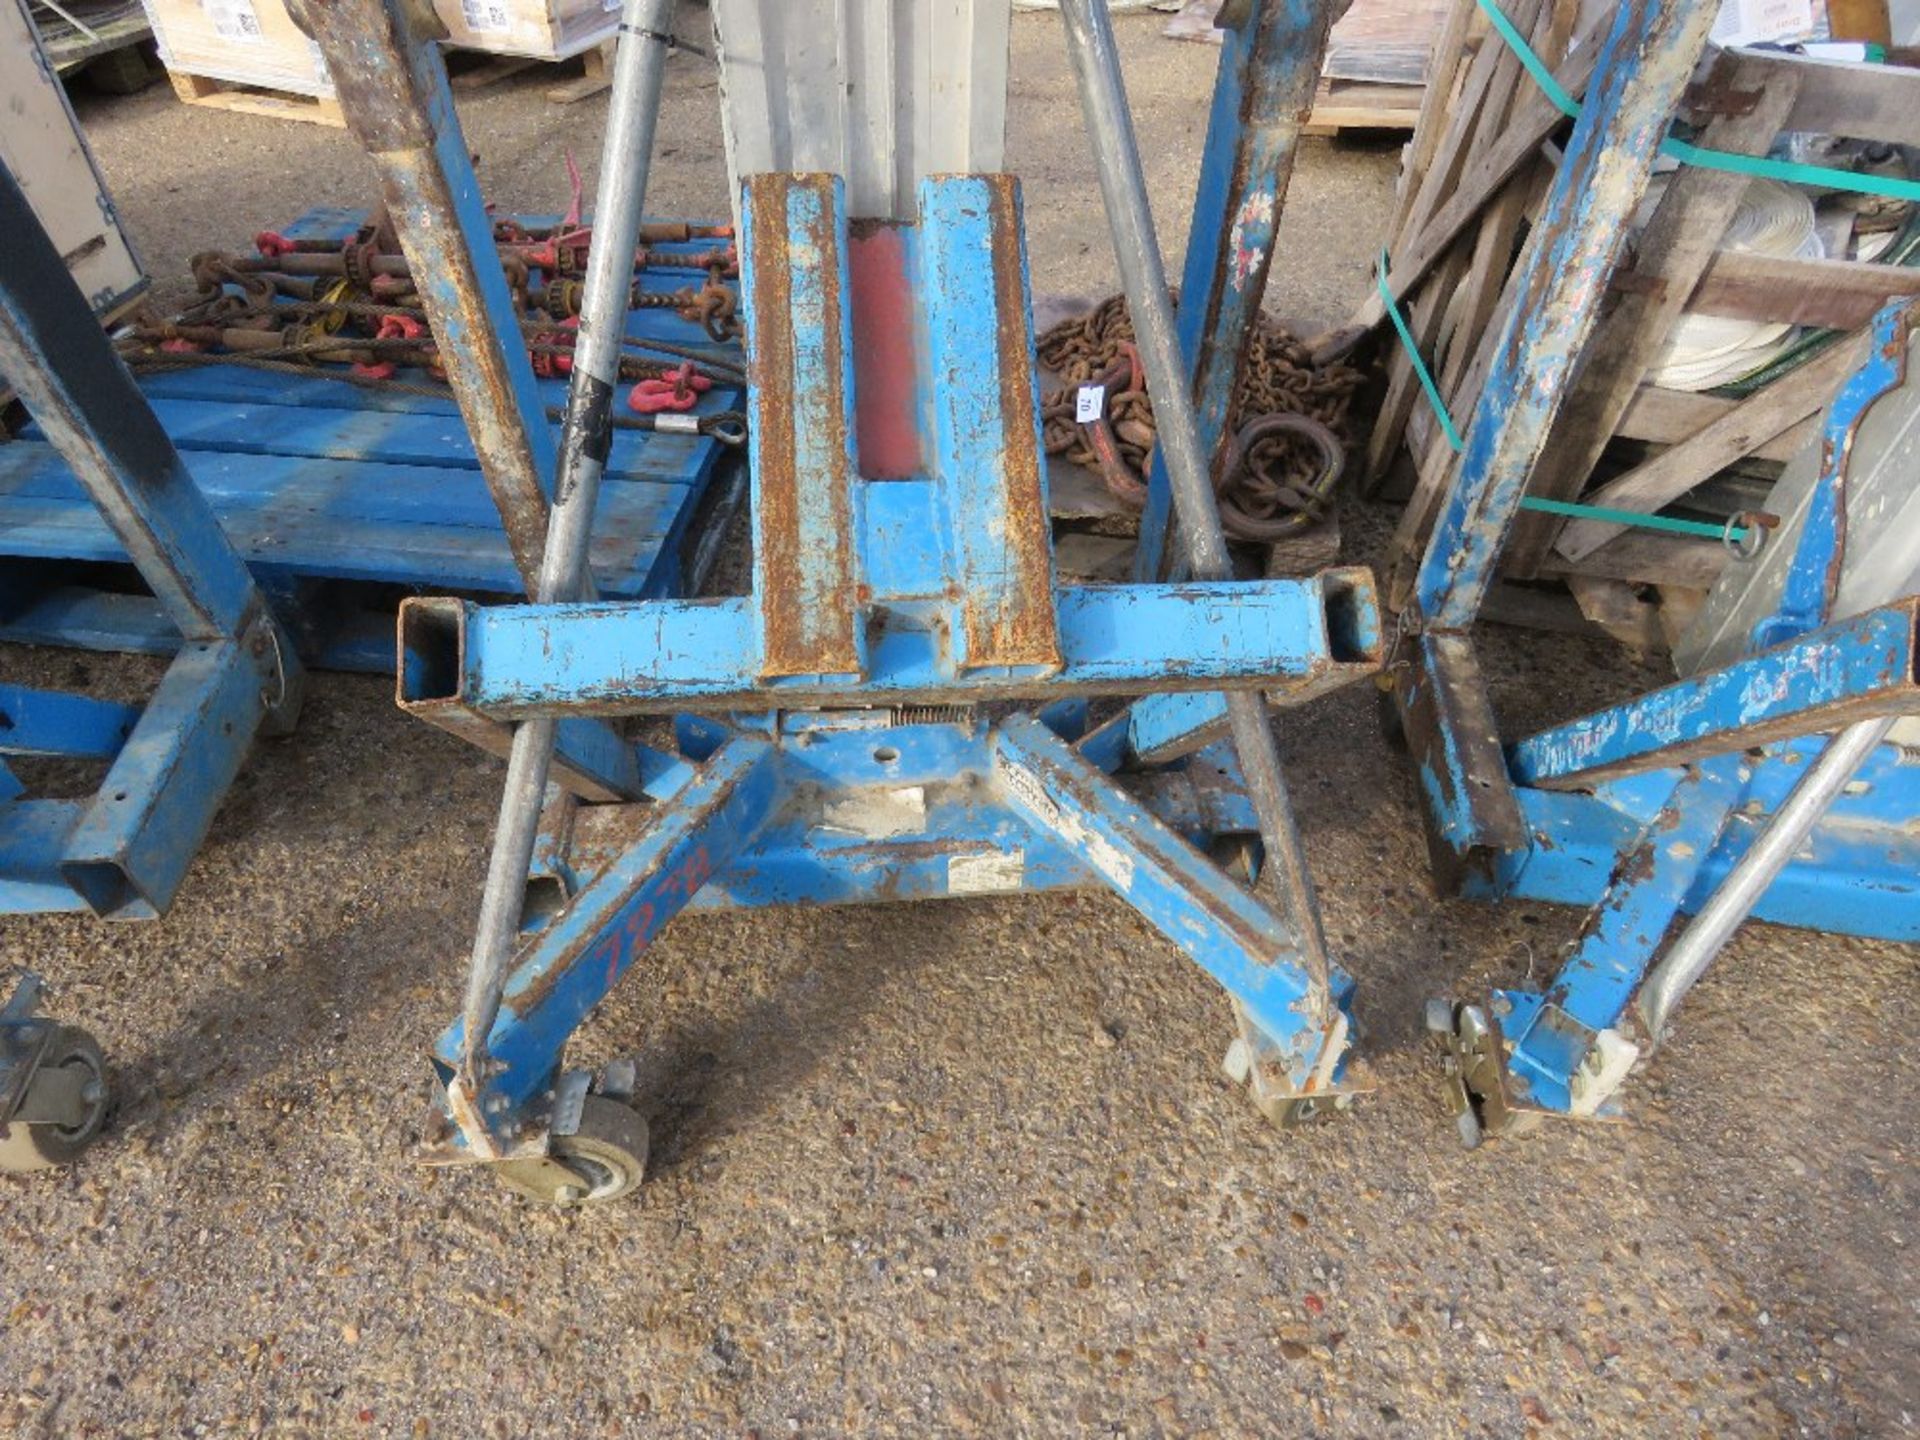 GENIE SLA10 MANUAL OPERTED HOIST / LIFT UNIT WITH FORKS. DIRECT FROM LOCAL COMPANY. - Image 2 of 6